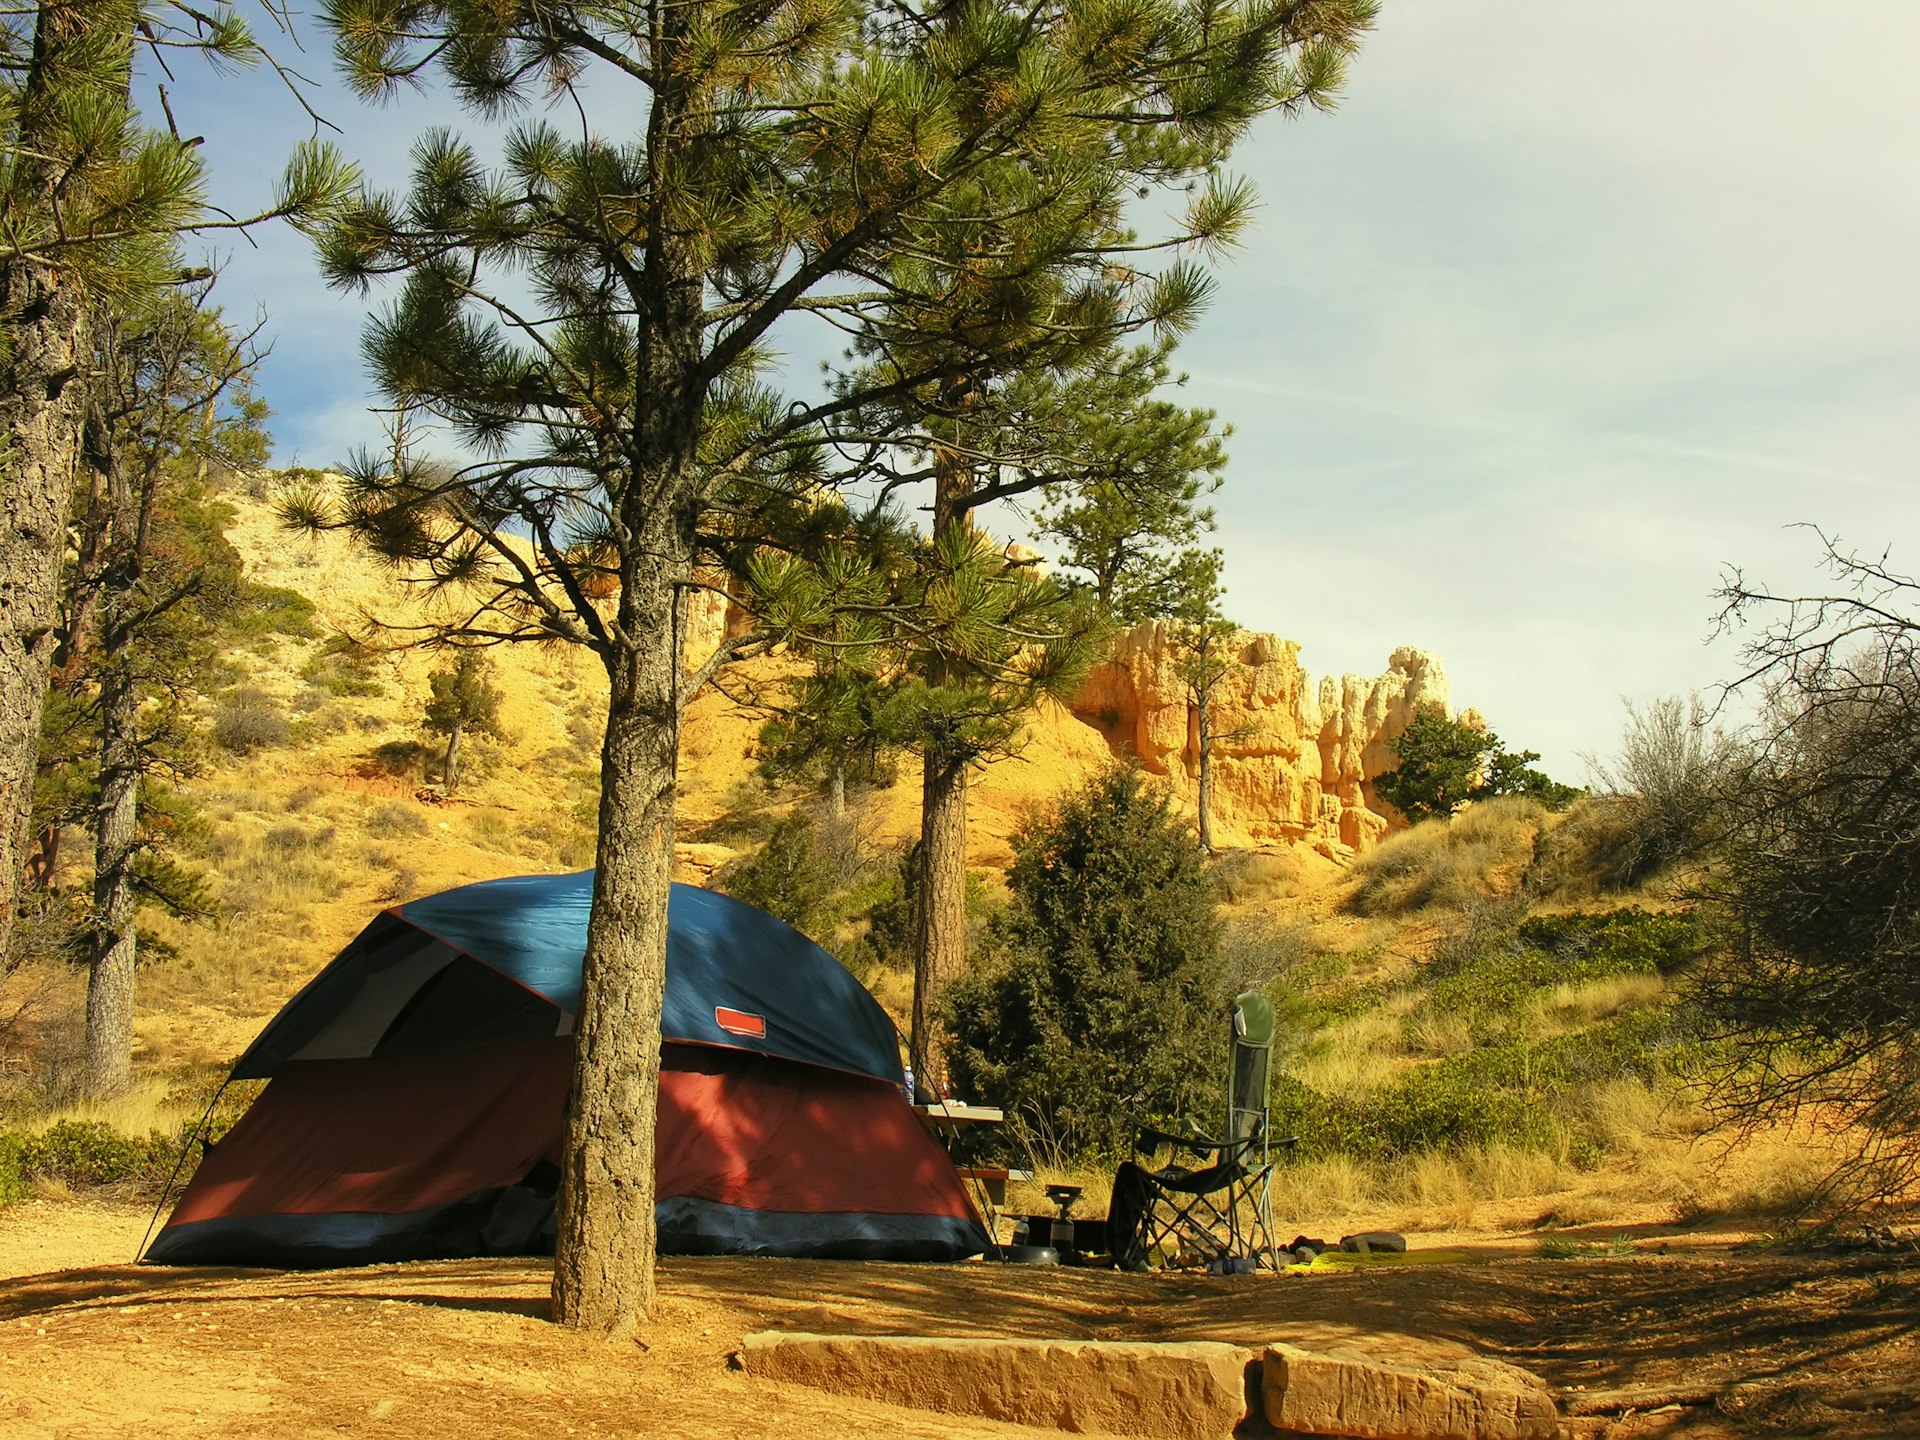 A tent at a campground during the late afternoon in the Bryce Canyon National Park